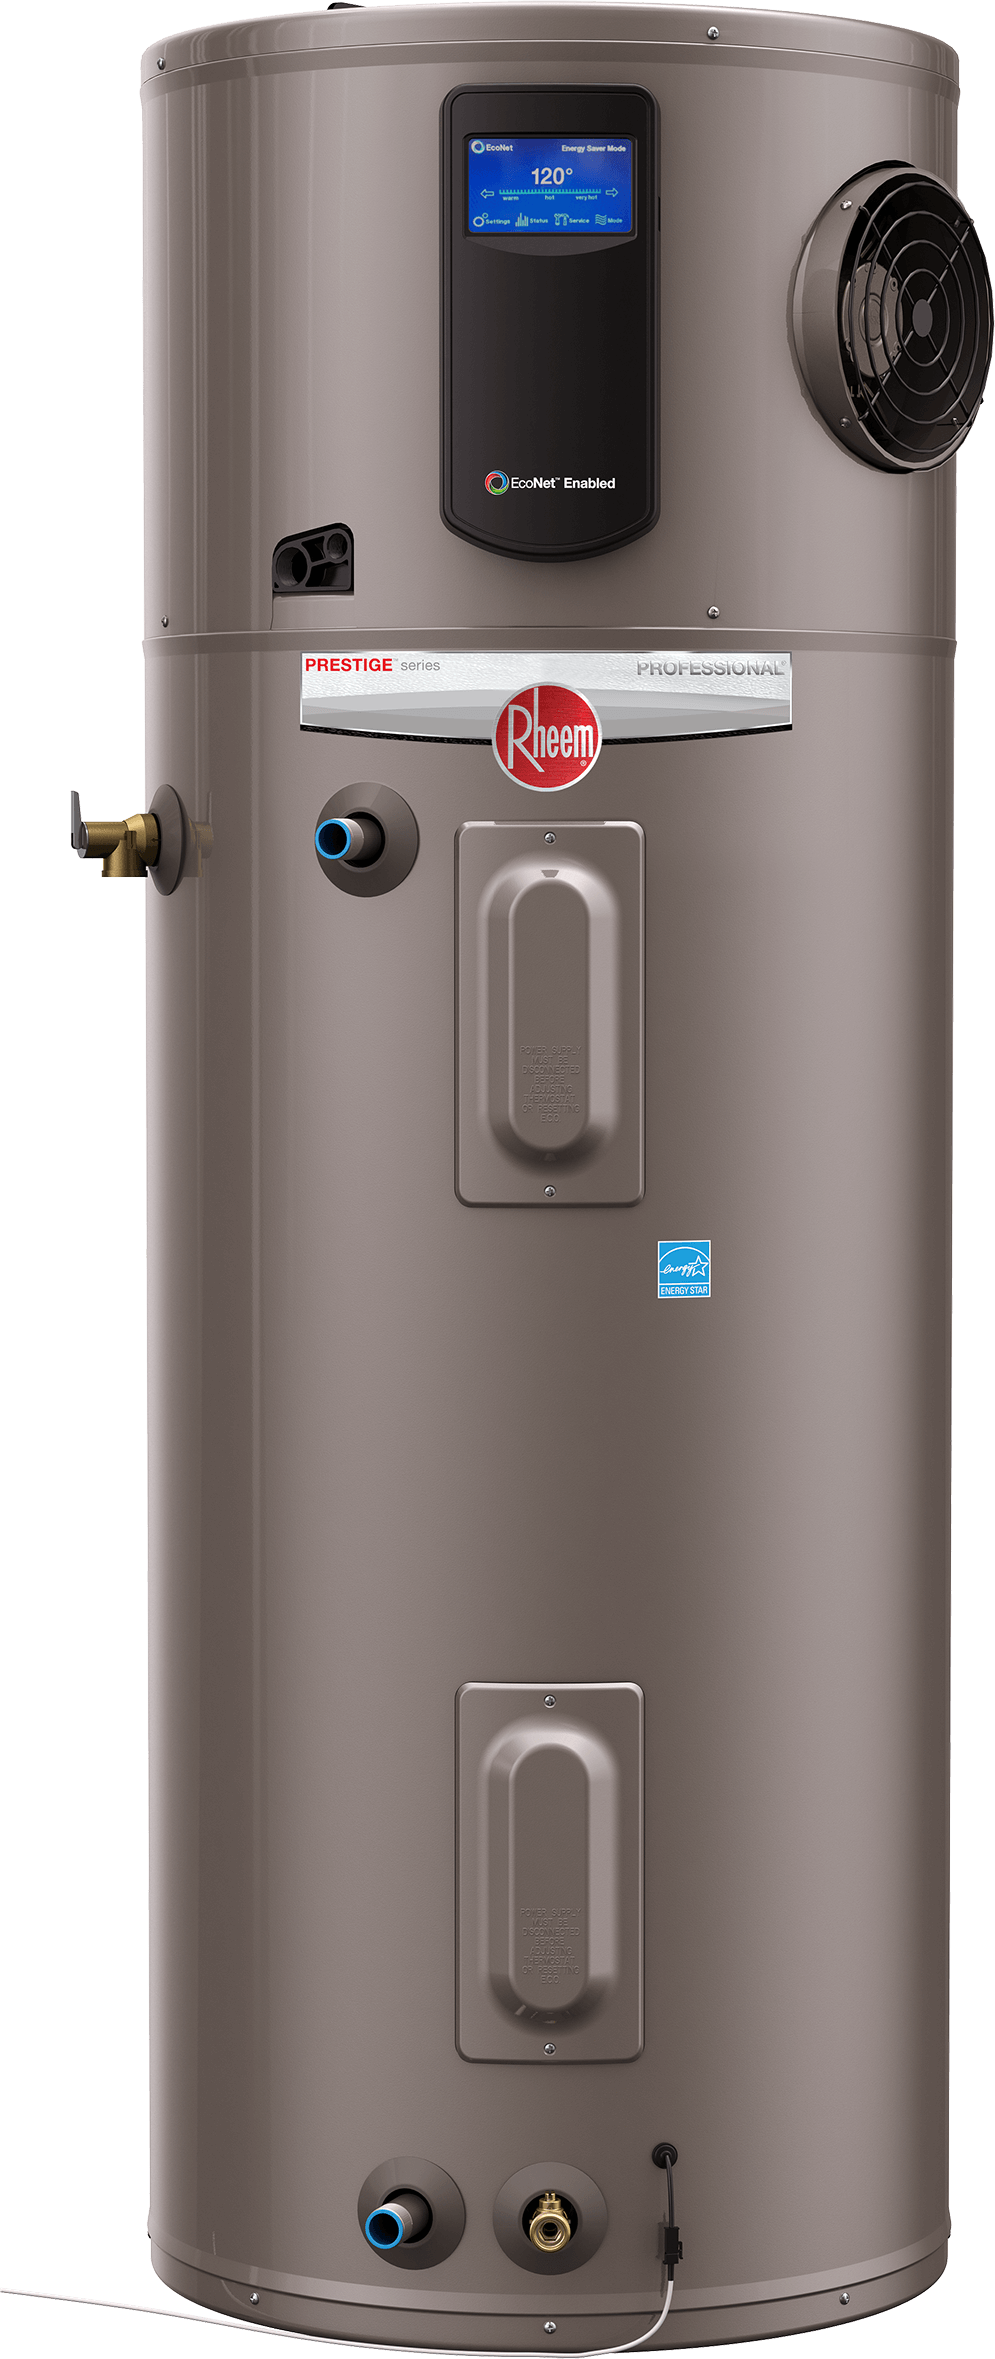 Rheem s Hybrid Electric Water Heater Is The Most Efficient Water Heater 